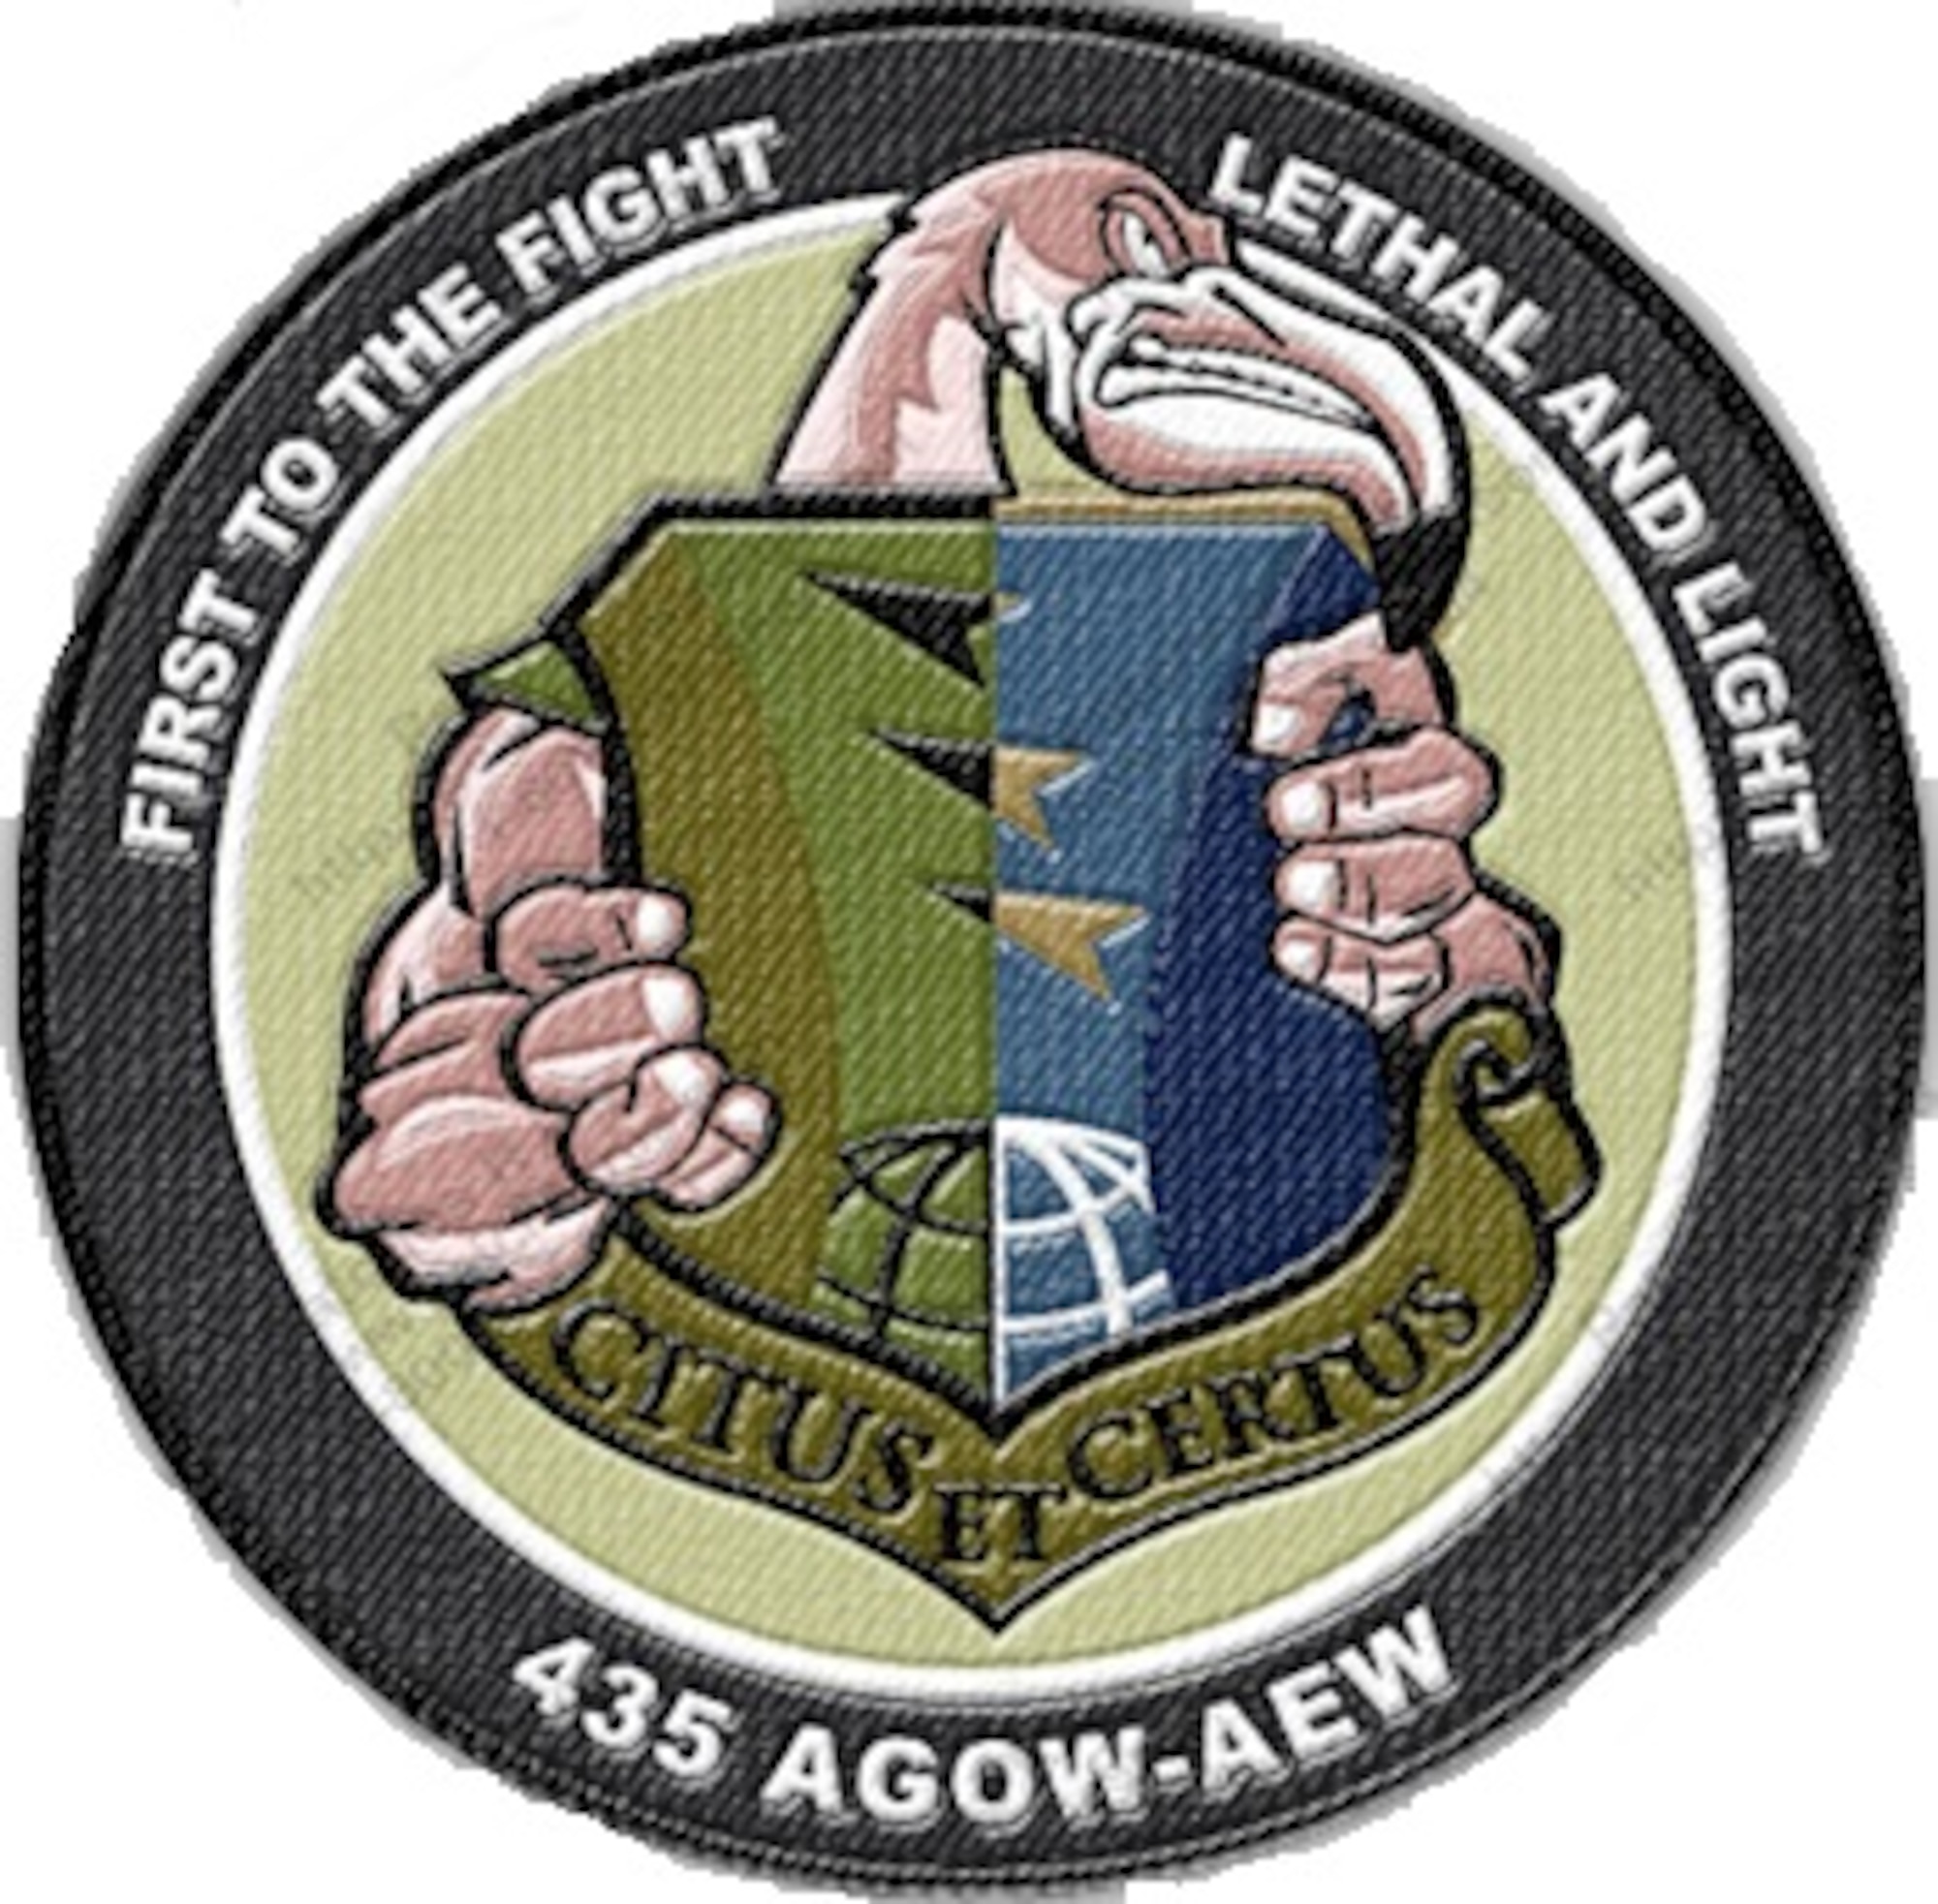 Fightin' Flamingo morale patch for 435th Air Ground Operations Wing and 435th Air Expeditionary Wing. (Courtesy graphic)
